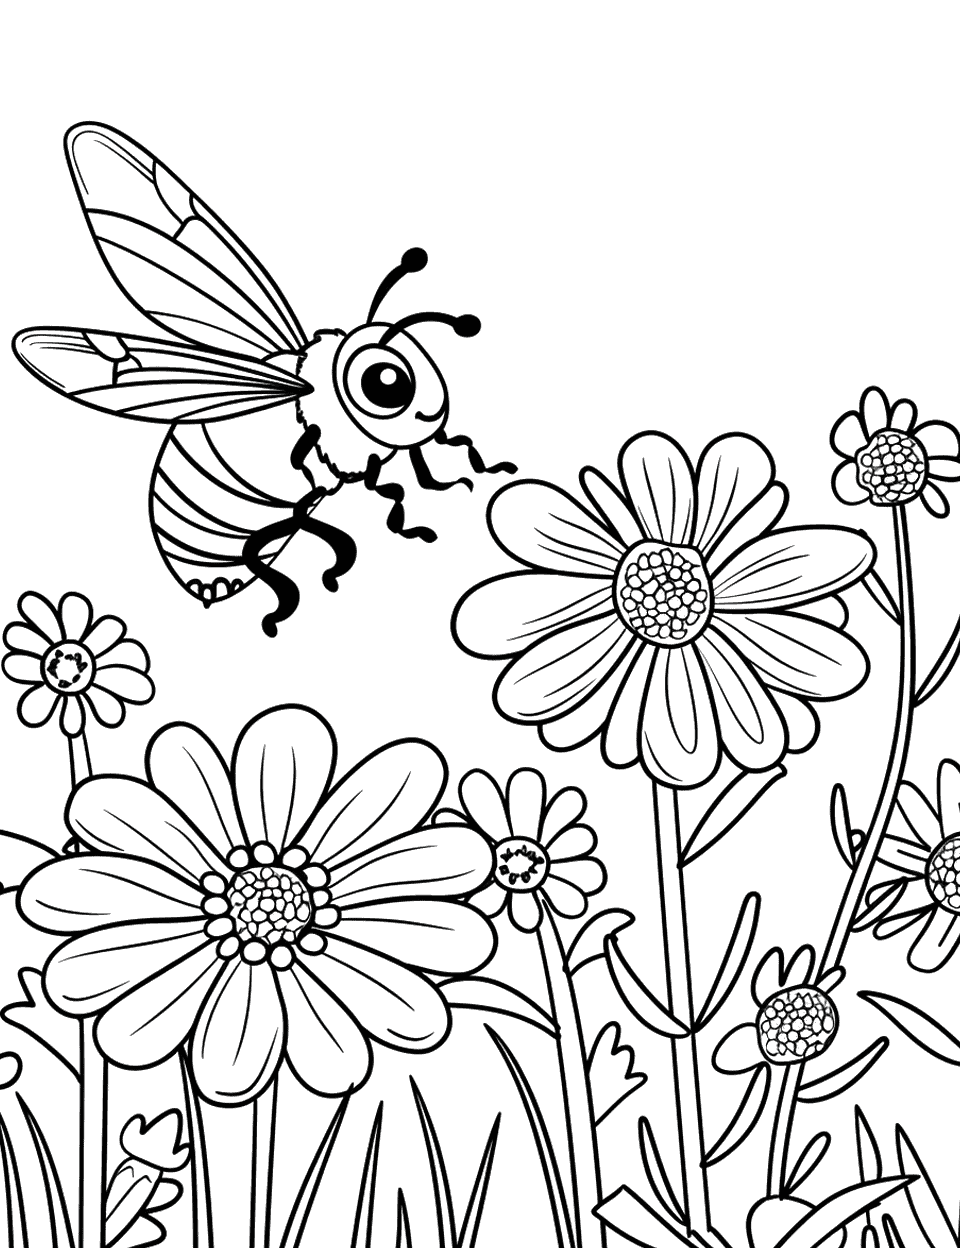 Bee Flying Among Flowers Coloring Page - A scene of a bee flying happily among various flowers in a garden.